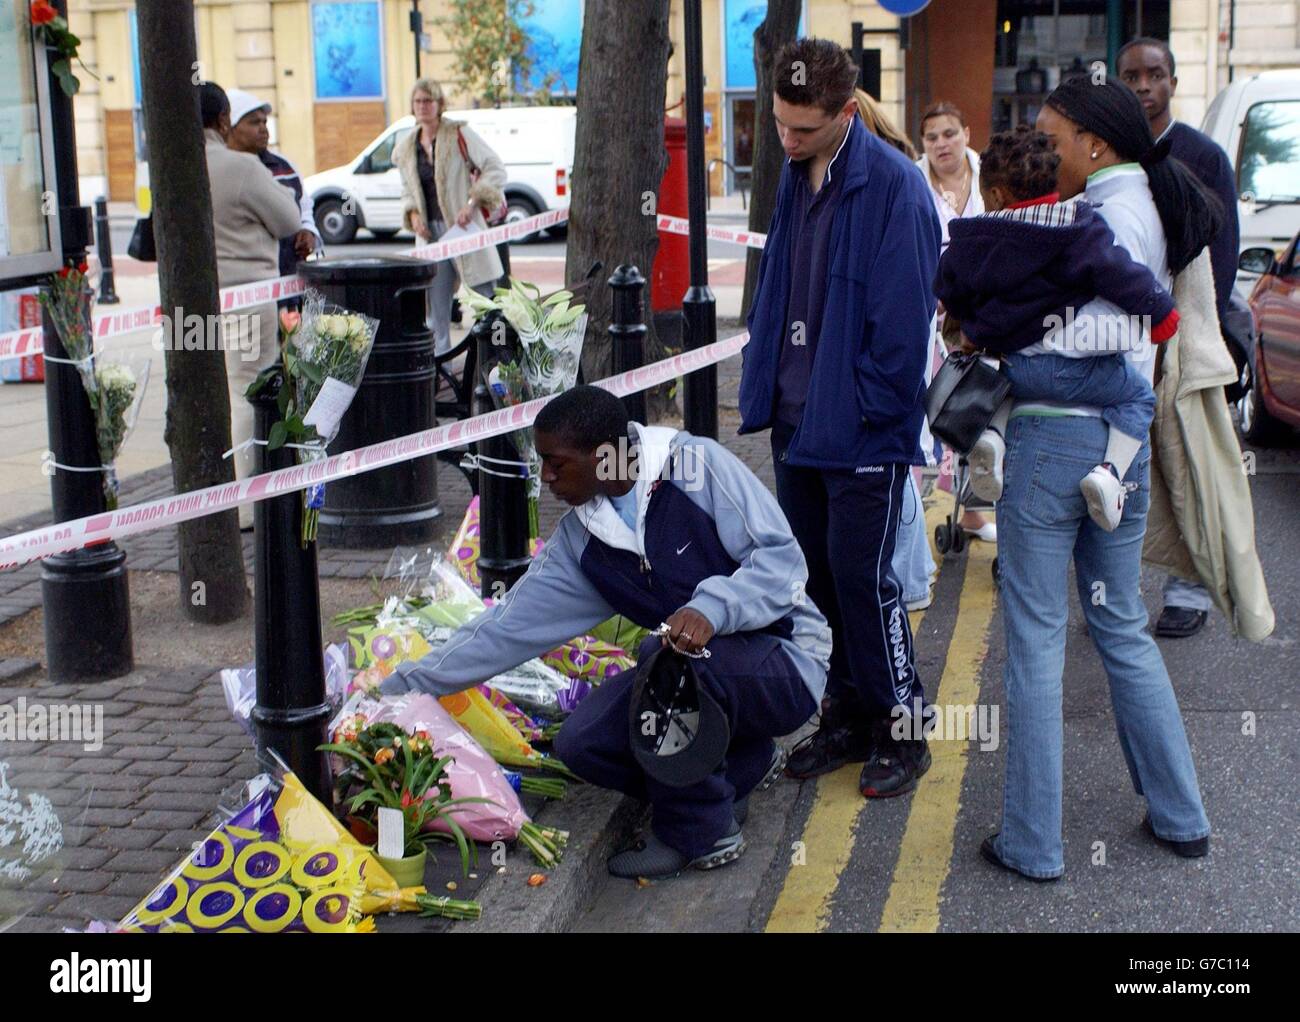 Former school mates (centre) of an as yet unnamed 16 year old schoolboy who was stabbed to death near Hackney Town Hall, London, gather near flowers. The boy was stabbed during the clash in east London, shortly before 4pm yesterday as school classes finished. Witnesses said they saw youngsters chasing each other along Mare Street before the fatal wounding. Stock Photo